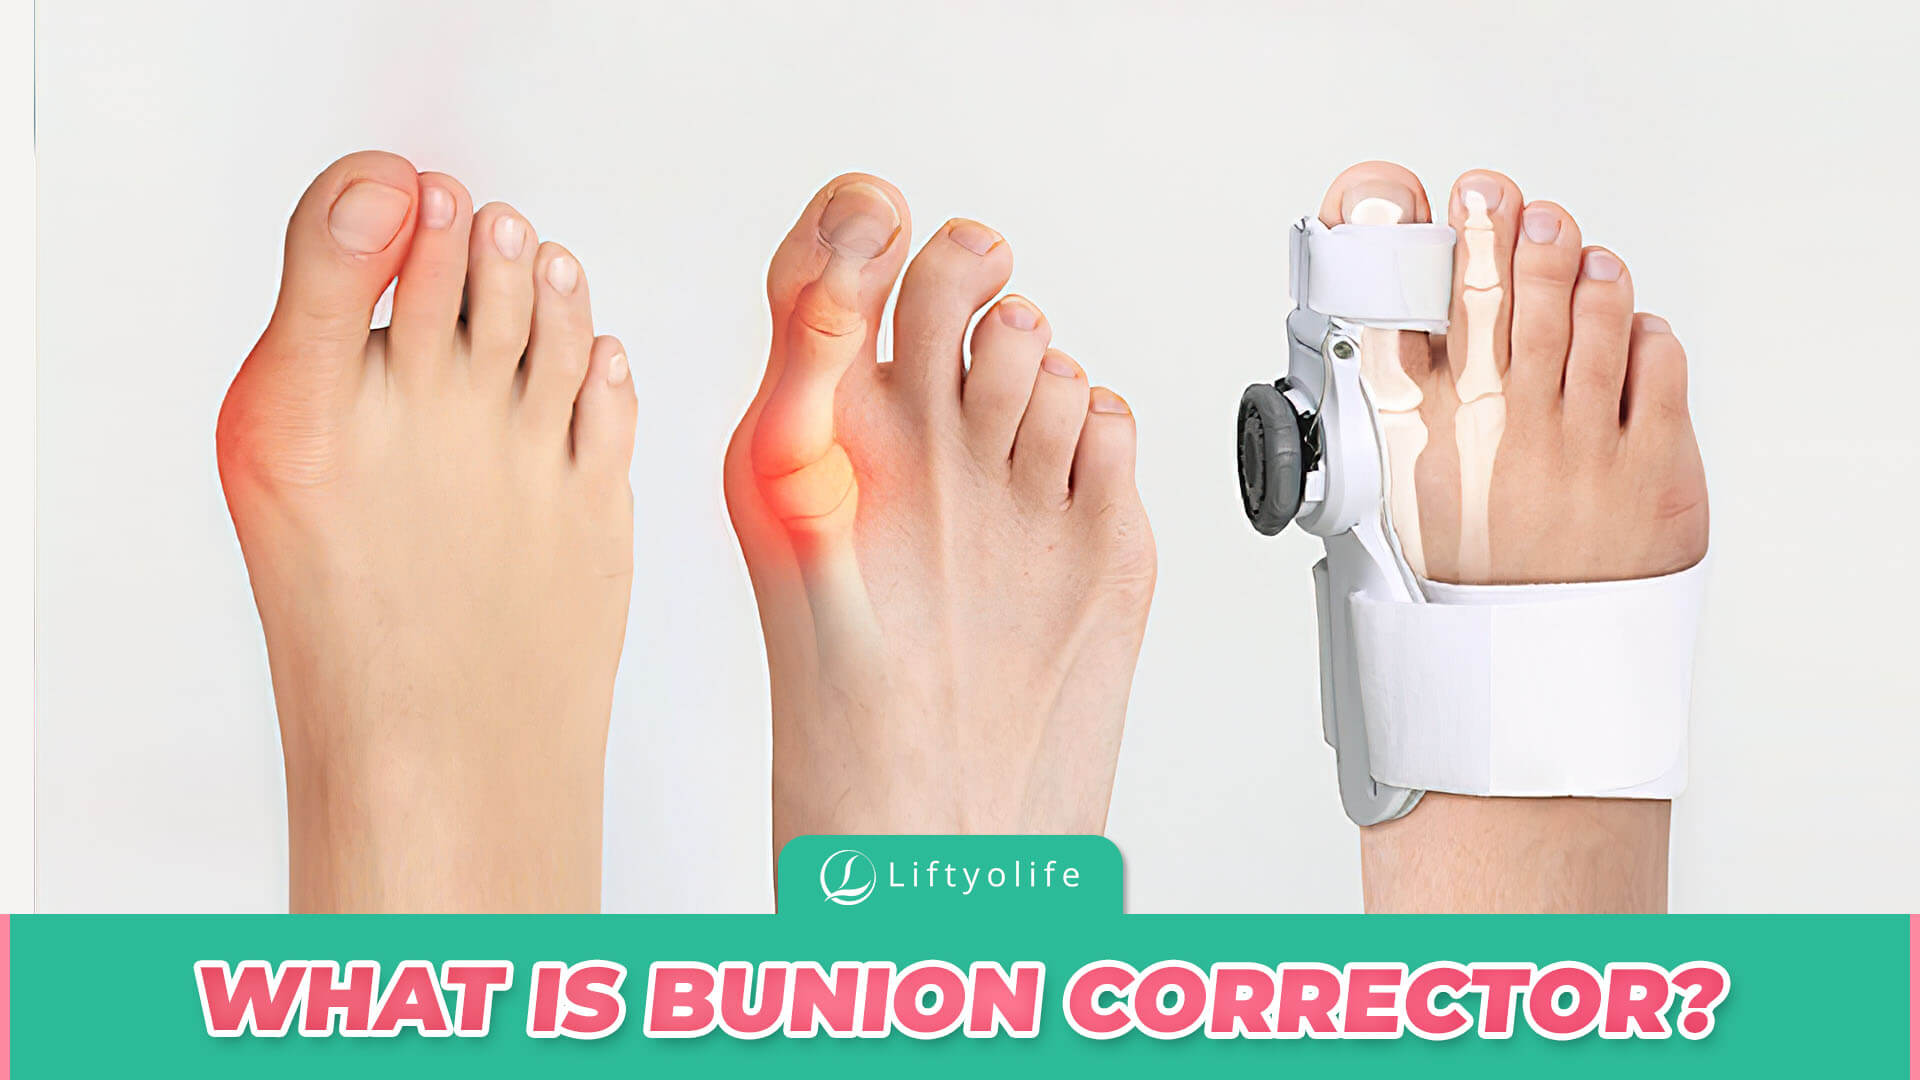 What Is Bunion Corrector?